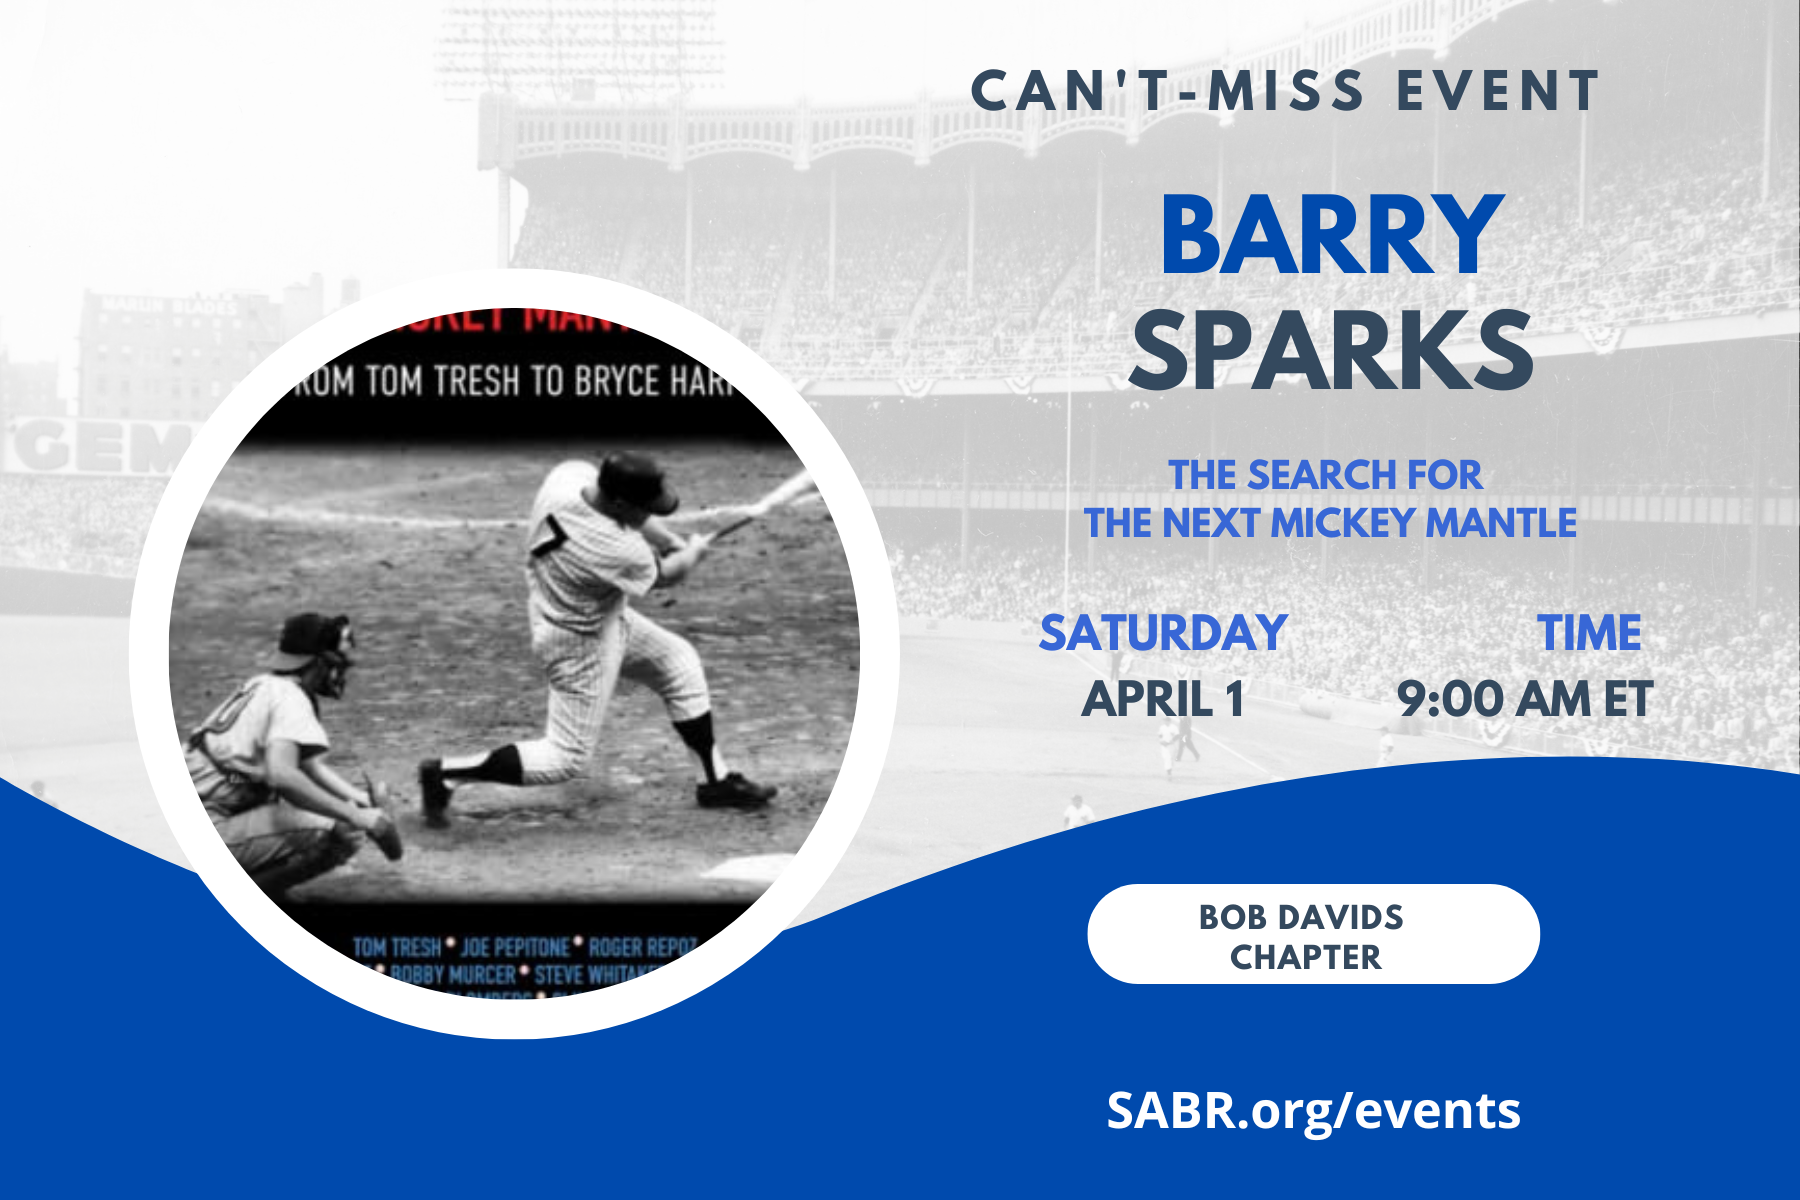 The next "Talkin' Baseball" meeting, hosted by the SABR Bob Davids Chapter in Washington D.C. and surrounding communities in Maryland and Virginia, will be held via Zoom at 9:00 a.m. Eastern on Saturday, April 1, 2023. All baseball fans are welcome to attend. Our speaker will be SABR member and former Bob Davids board member  Barry Sparks, who will talk about his recently released book The Search for the Next Mickey Mantle: From Tom Tresh to Bryce Harper. 